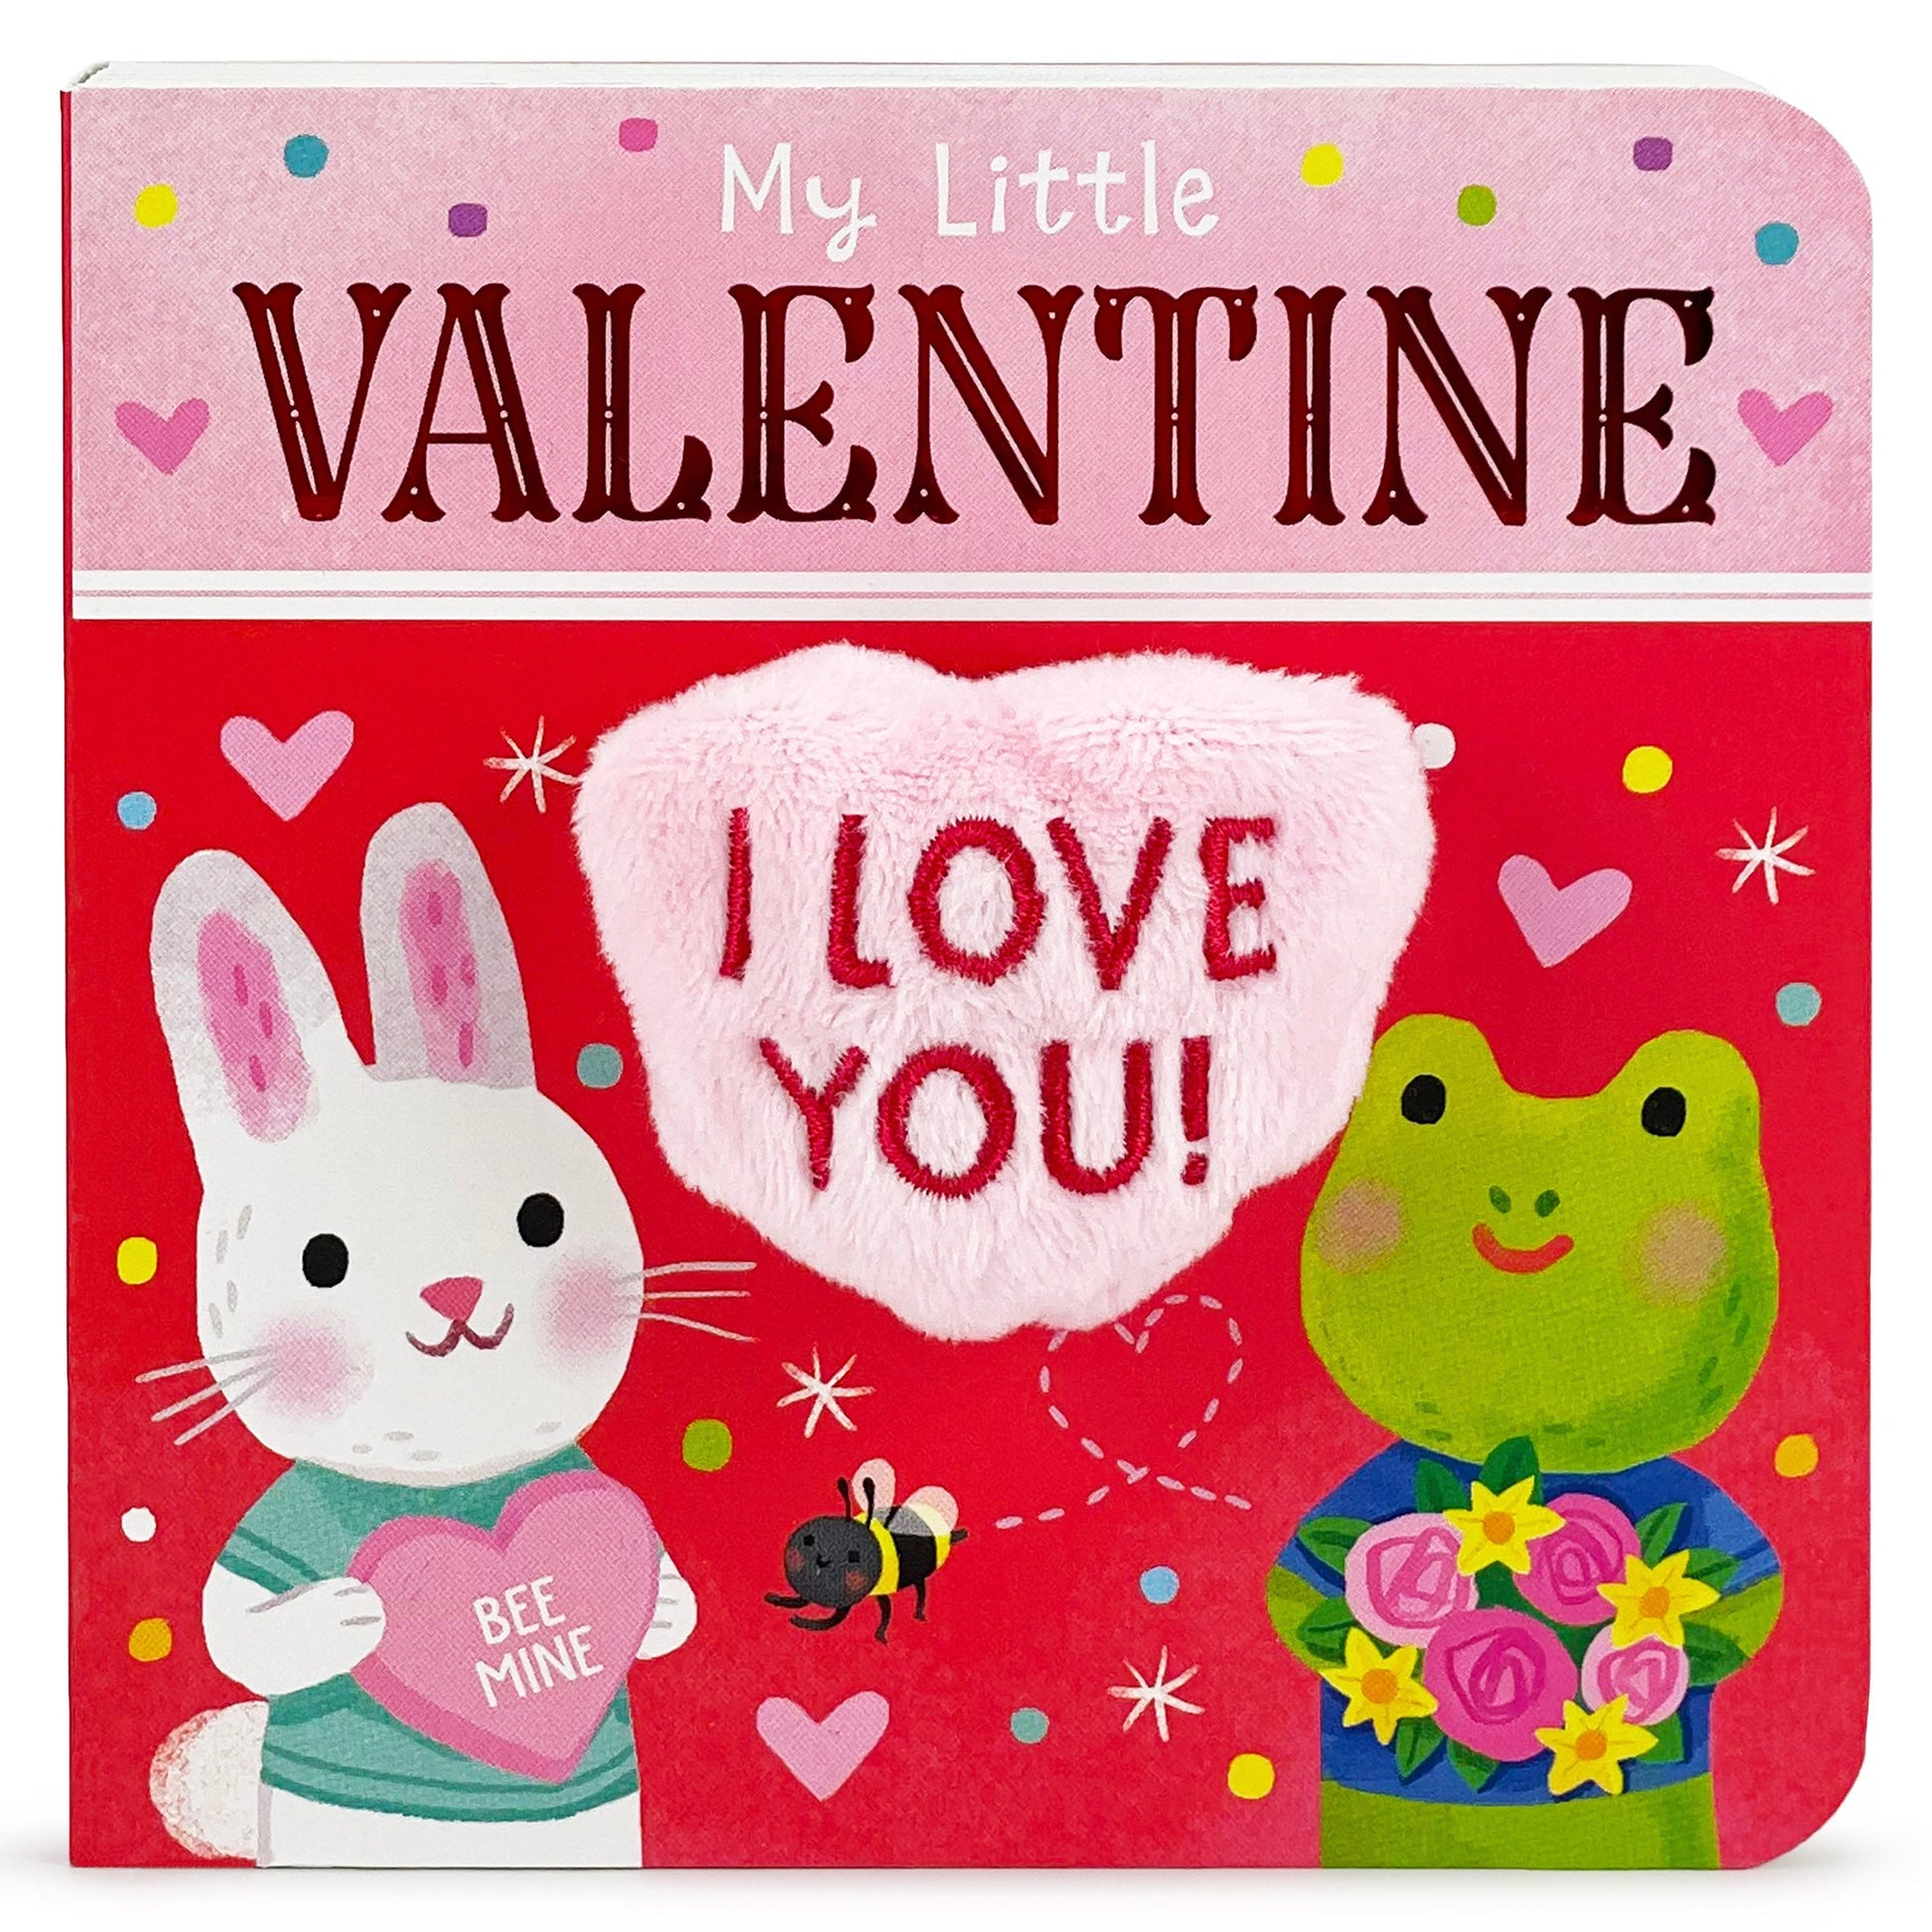 front cover of book is pink and red with a soft heart with text "i love you" next to a bunny and frog, and title